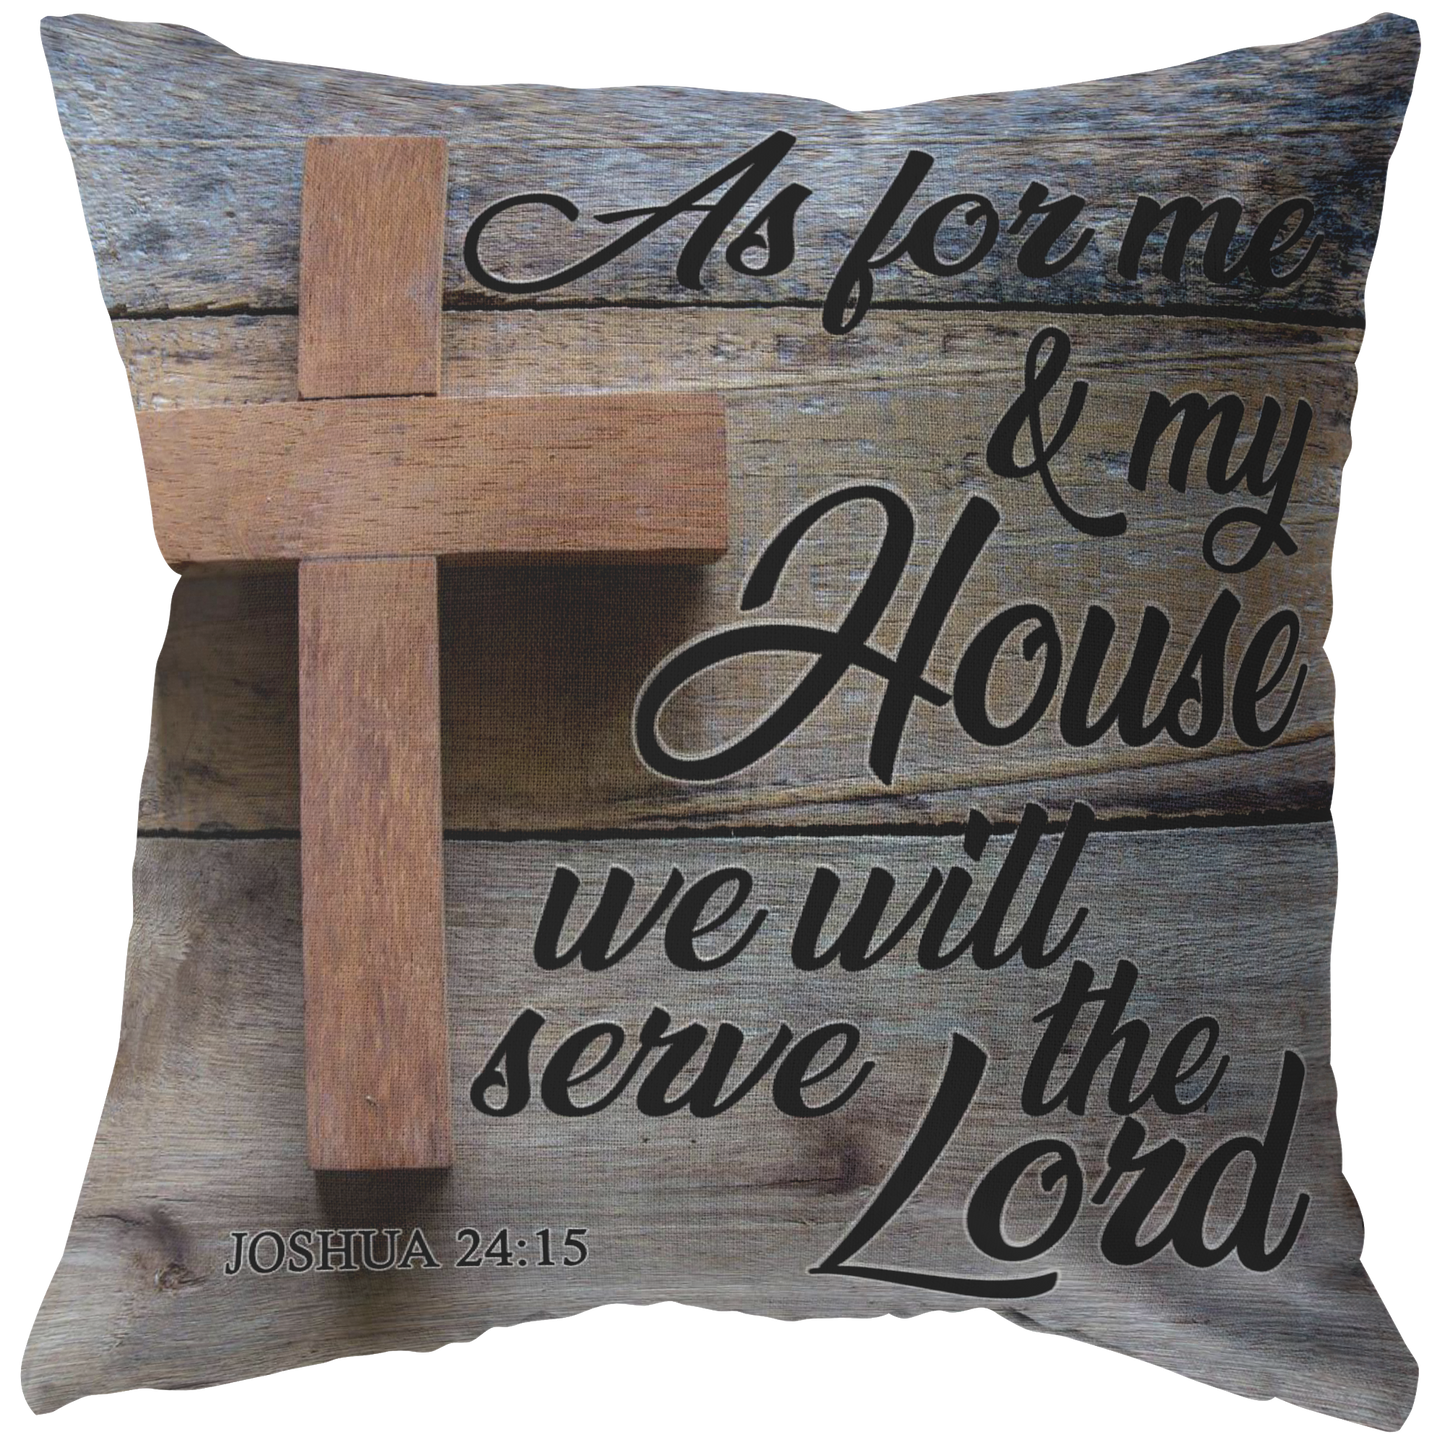 "Me And My House, We Will Serve The Lord" Pillow